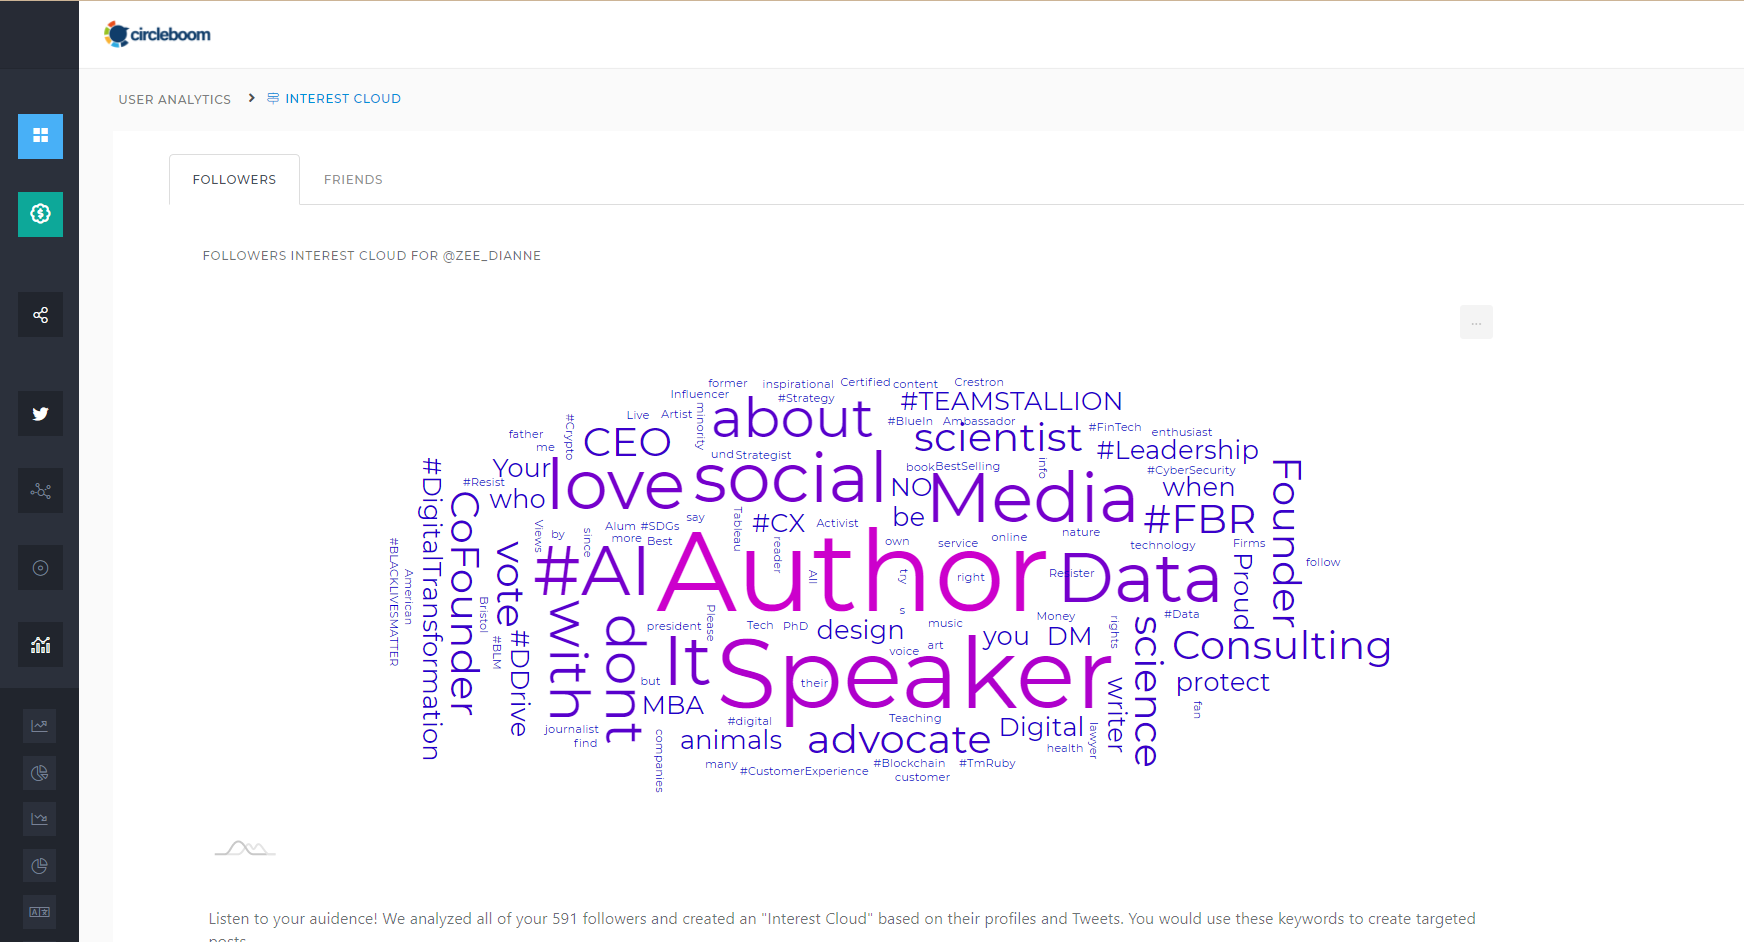 Interest Cloud feature of Circleboom Twitter shows what keywords your followers mostly use and are interested in.